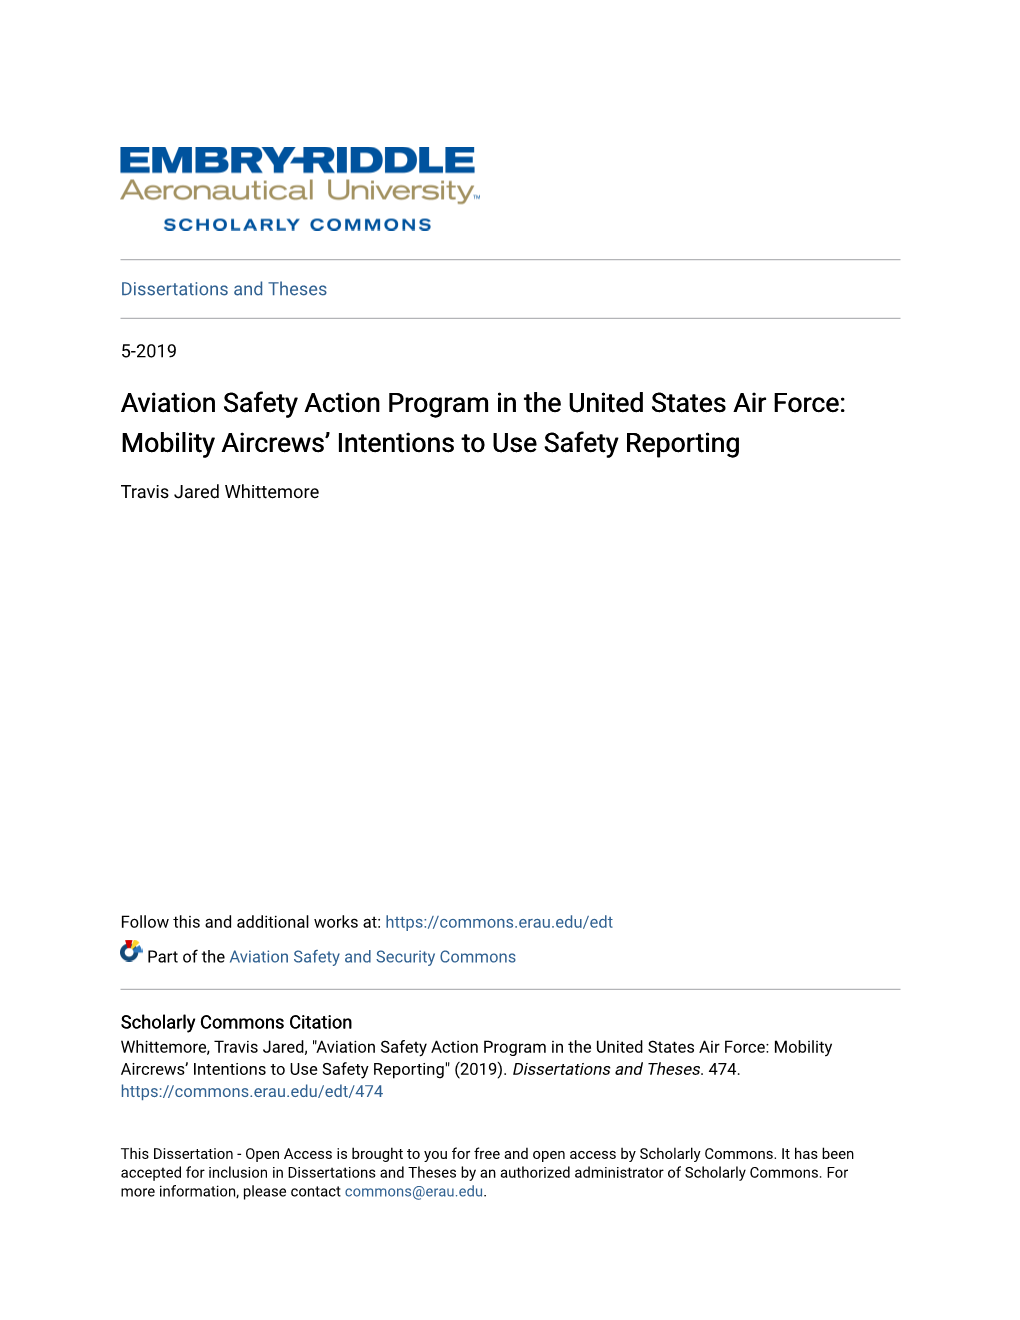 Aviation Safety Action Program in the United States Air Force: Mobility Aircrews’ Intentions to Use Safety Reporting